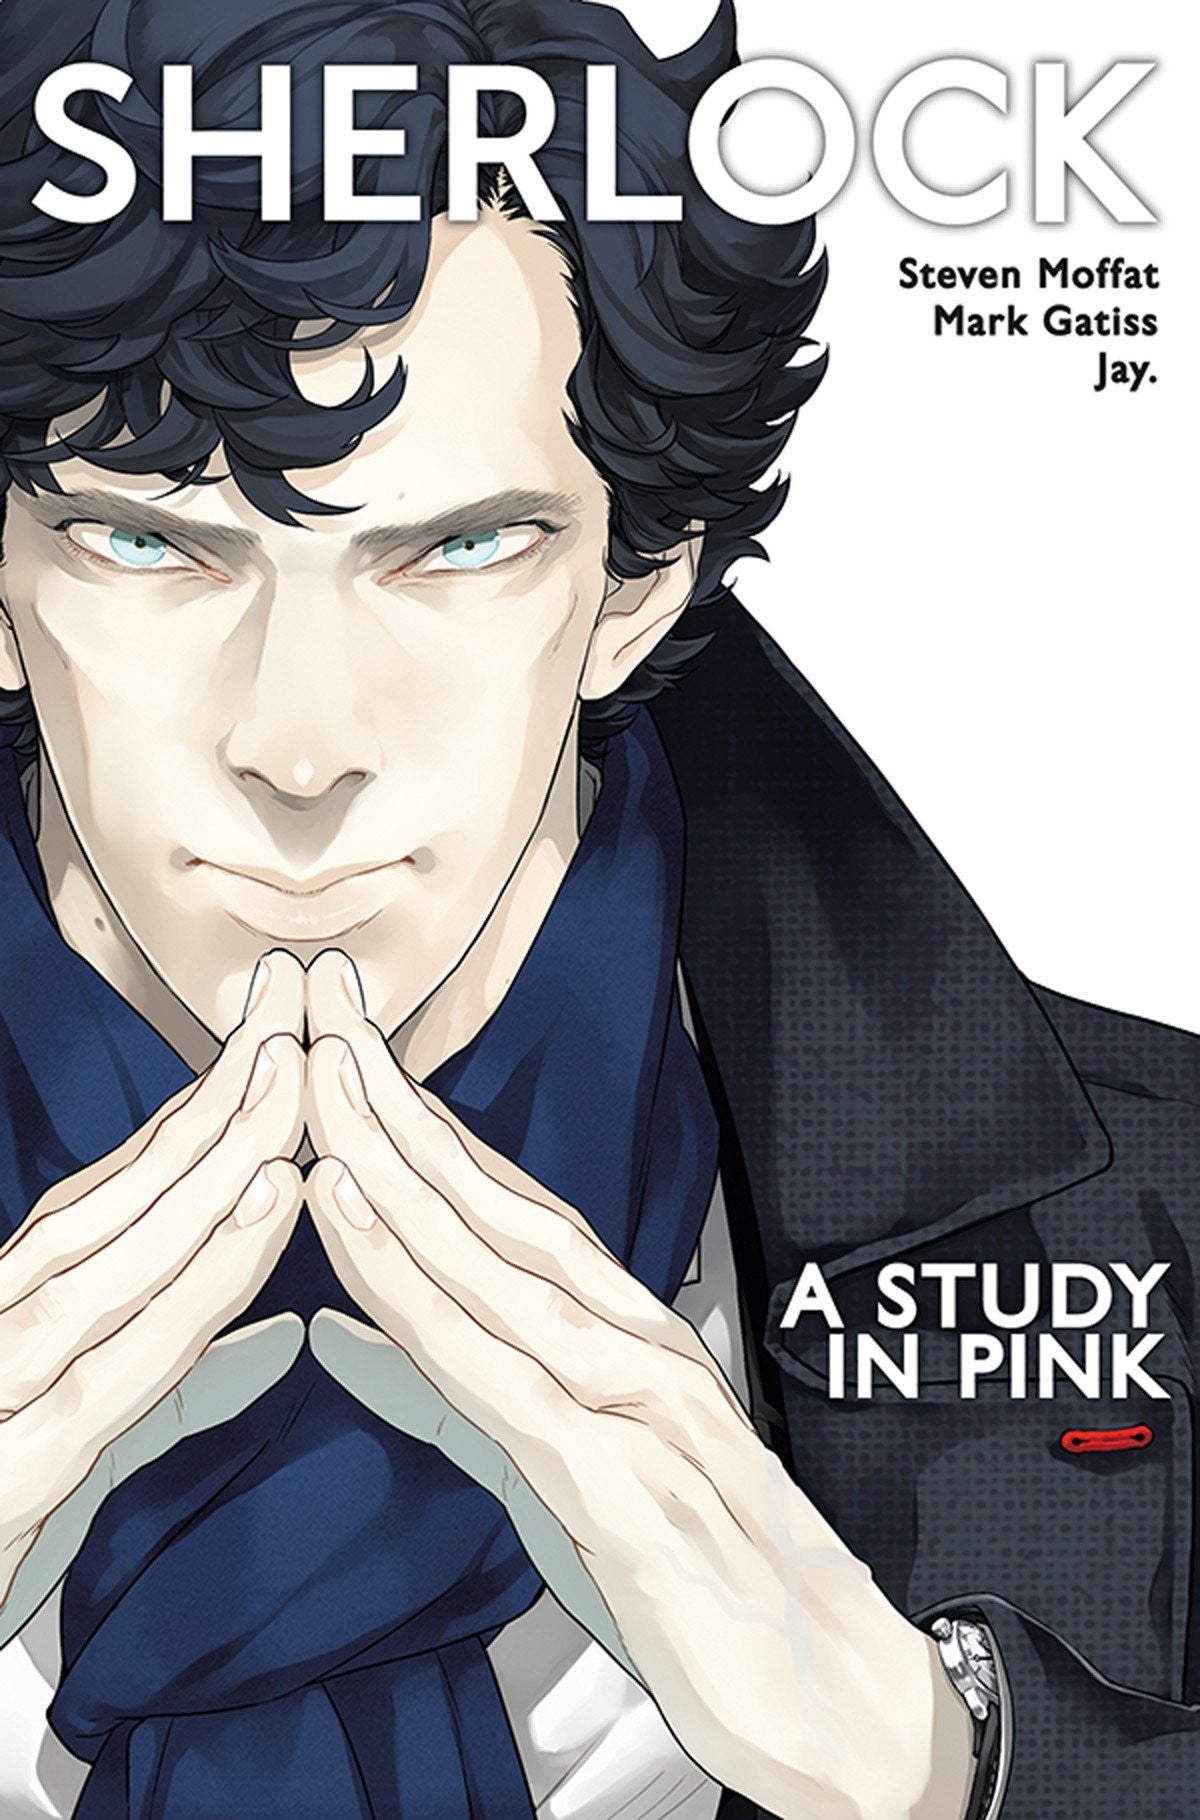 SHERLOCK A STUDY IN PINK TP COVER